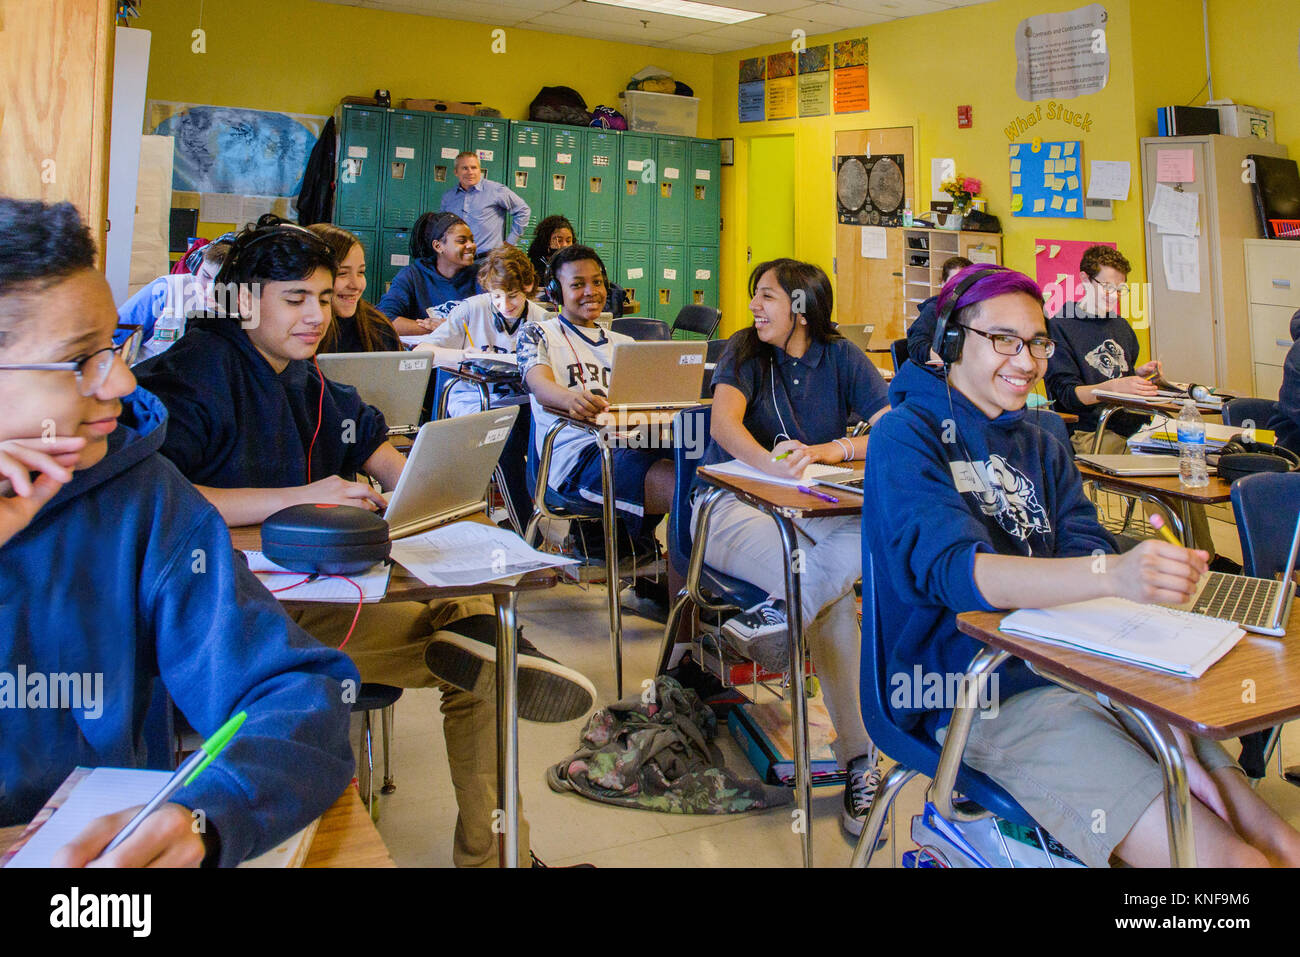 Class of teenage boys and girls doing schoolwork at classroom desks Stock Photo